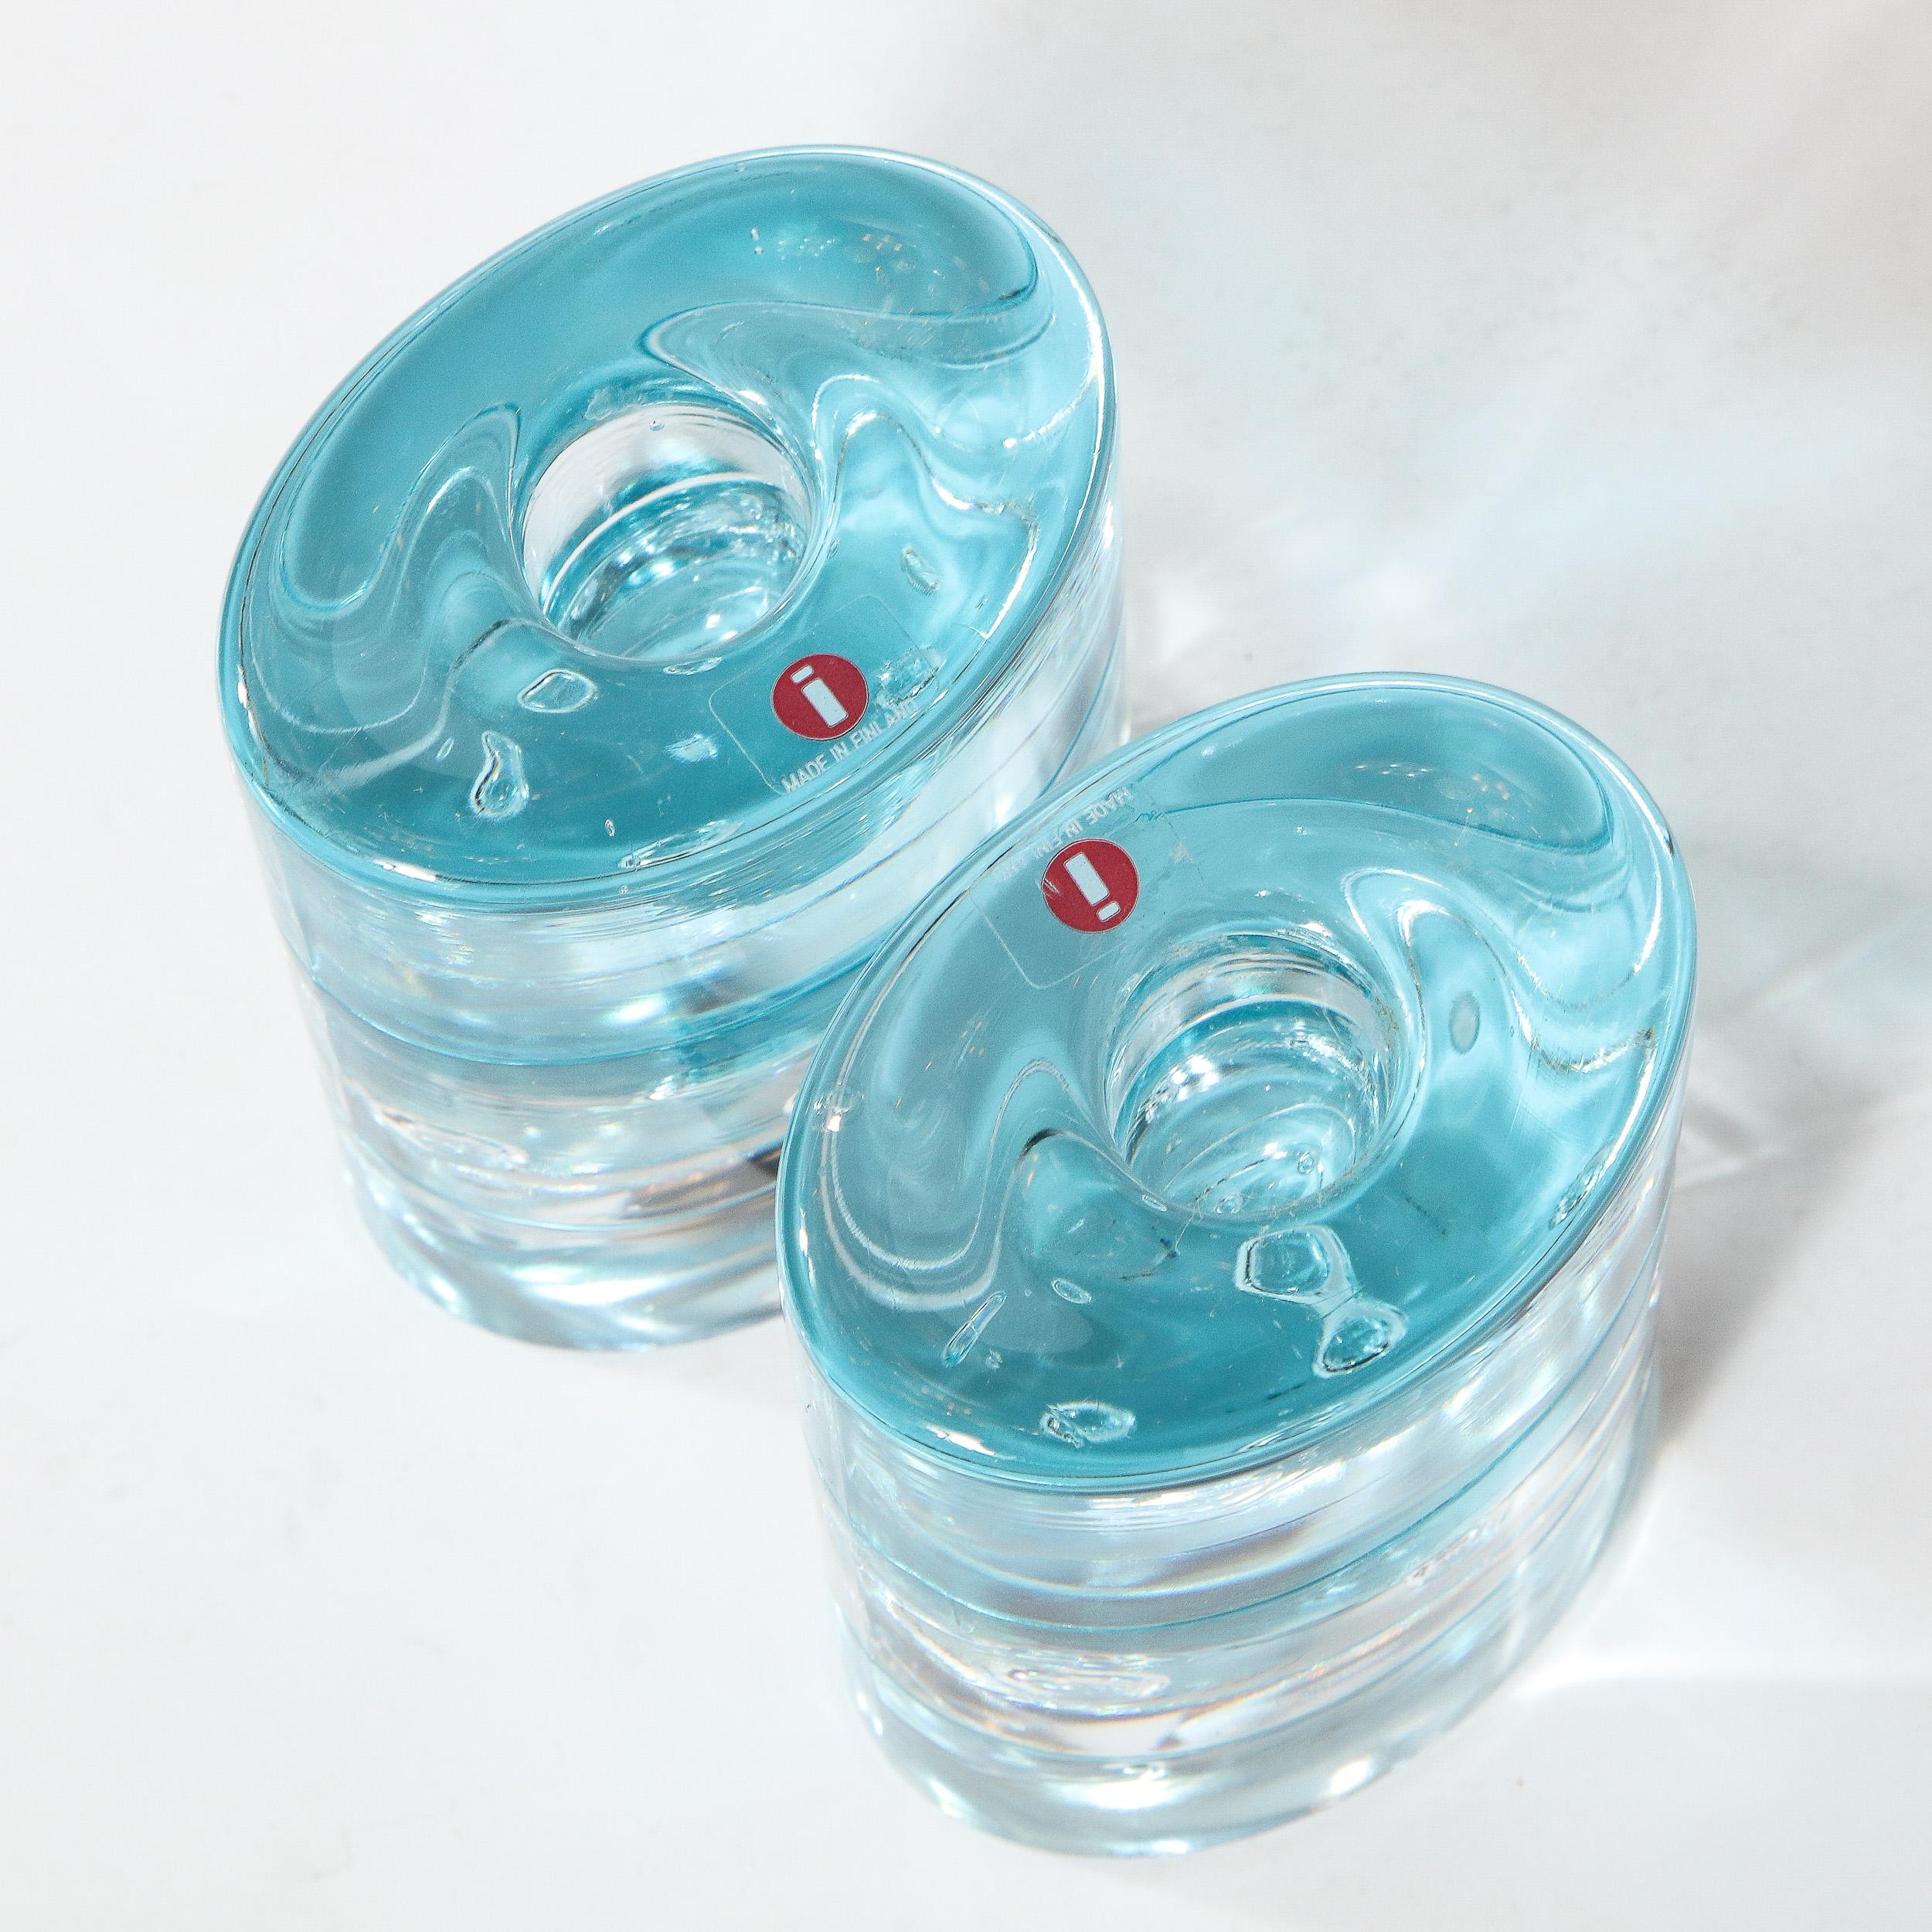 Pair of Modernist Candlesticks in Translucent and Acquamarine Glass by Littala For Sale 3